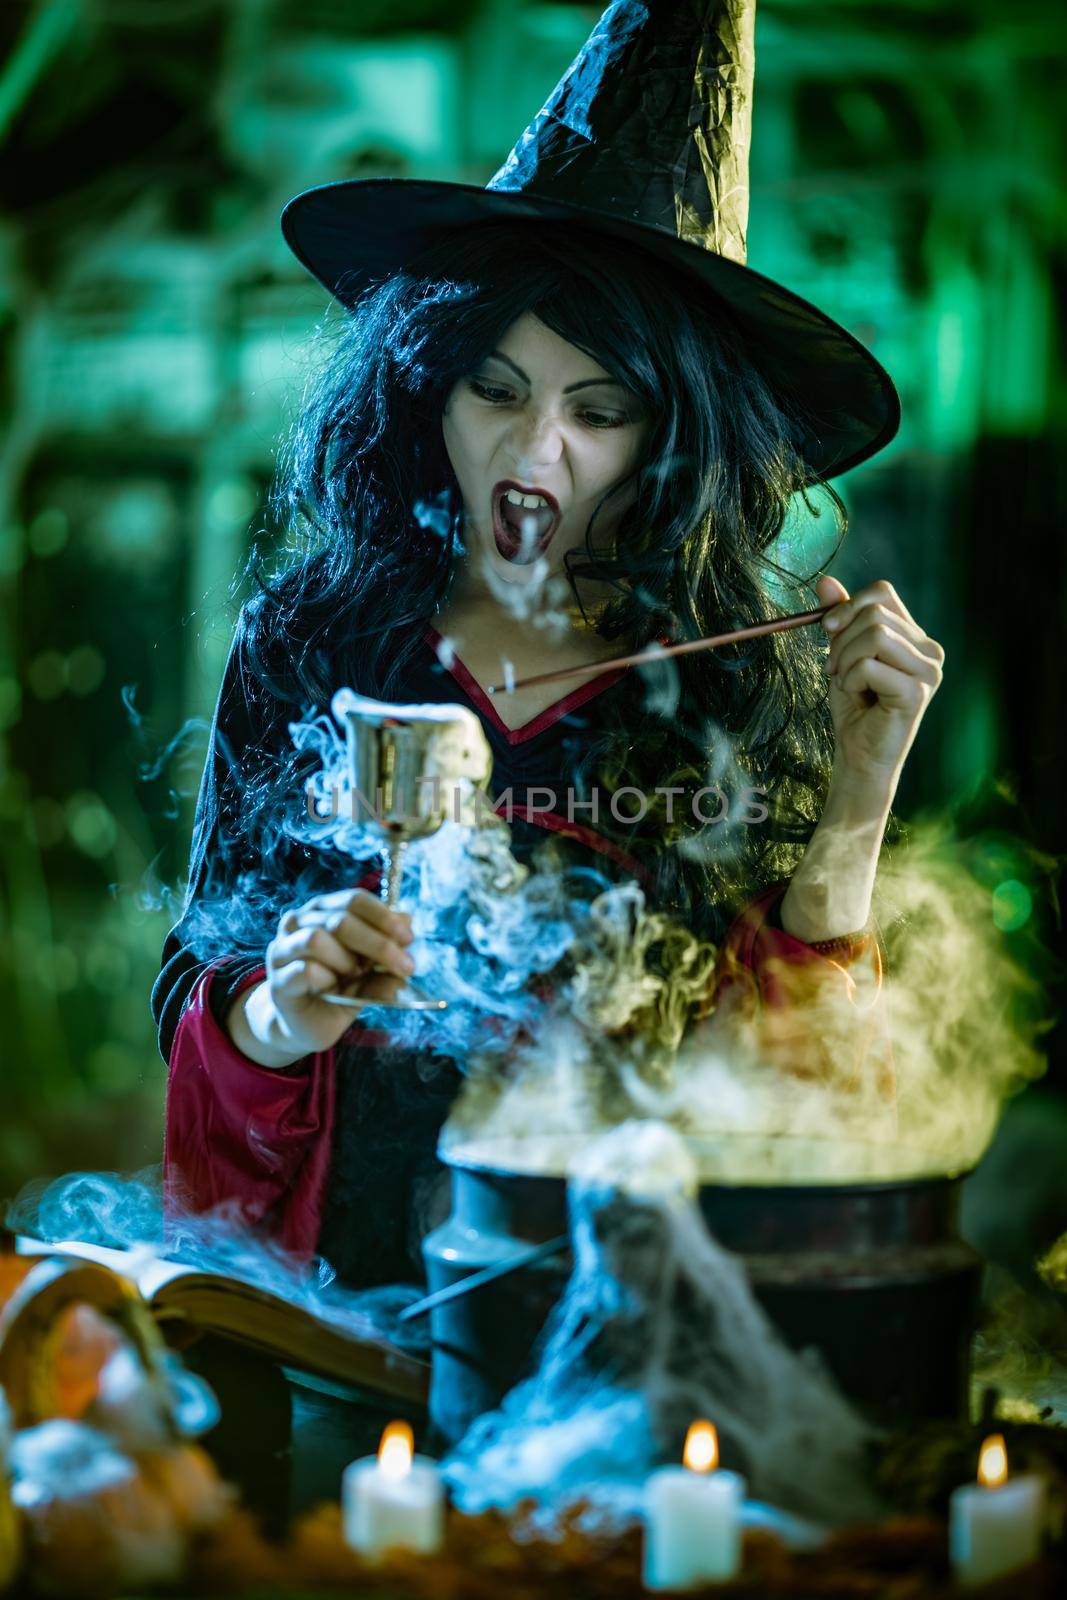 Magic Potion In The Goblet by MilanMarkovic78